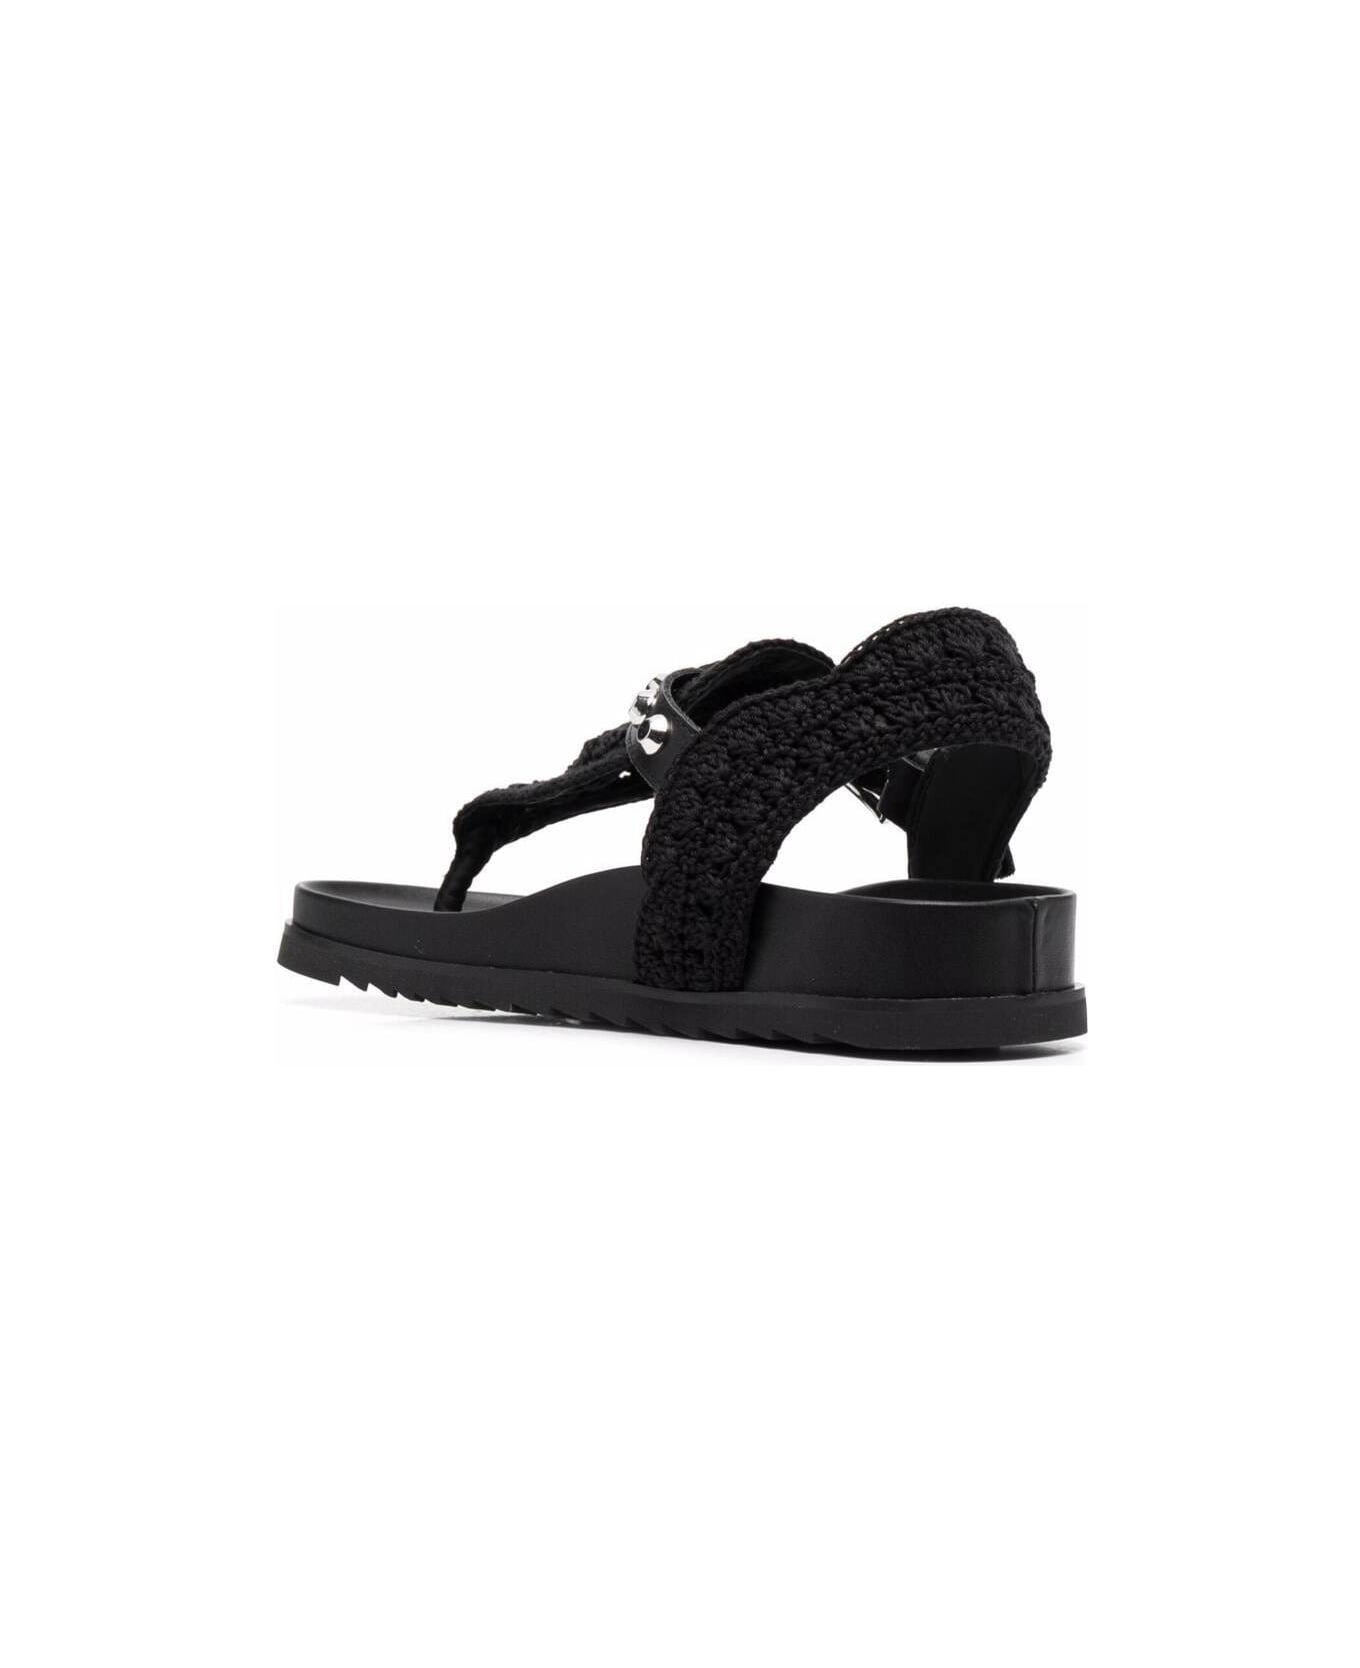 Ash Woman's Black Leather Sandals With Crochet  Insert - Black